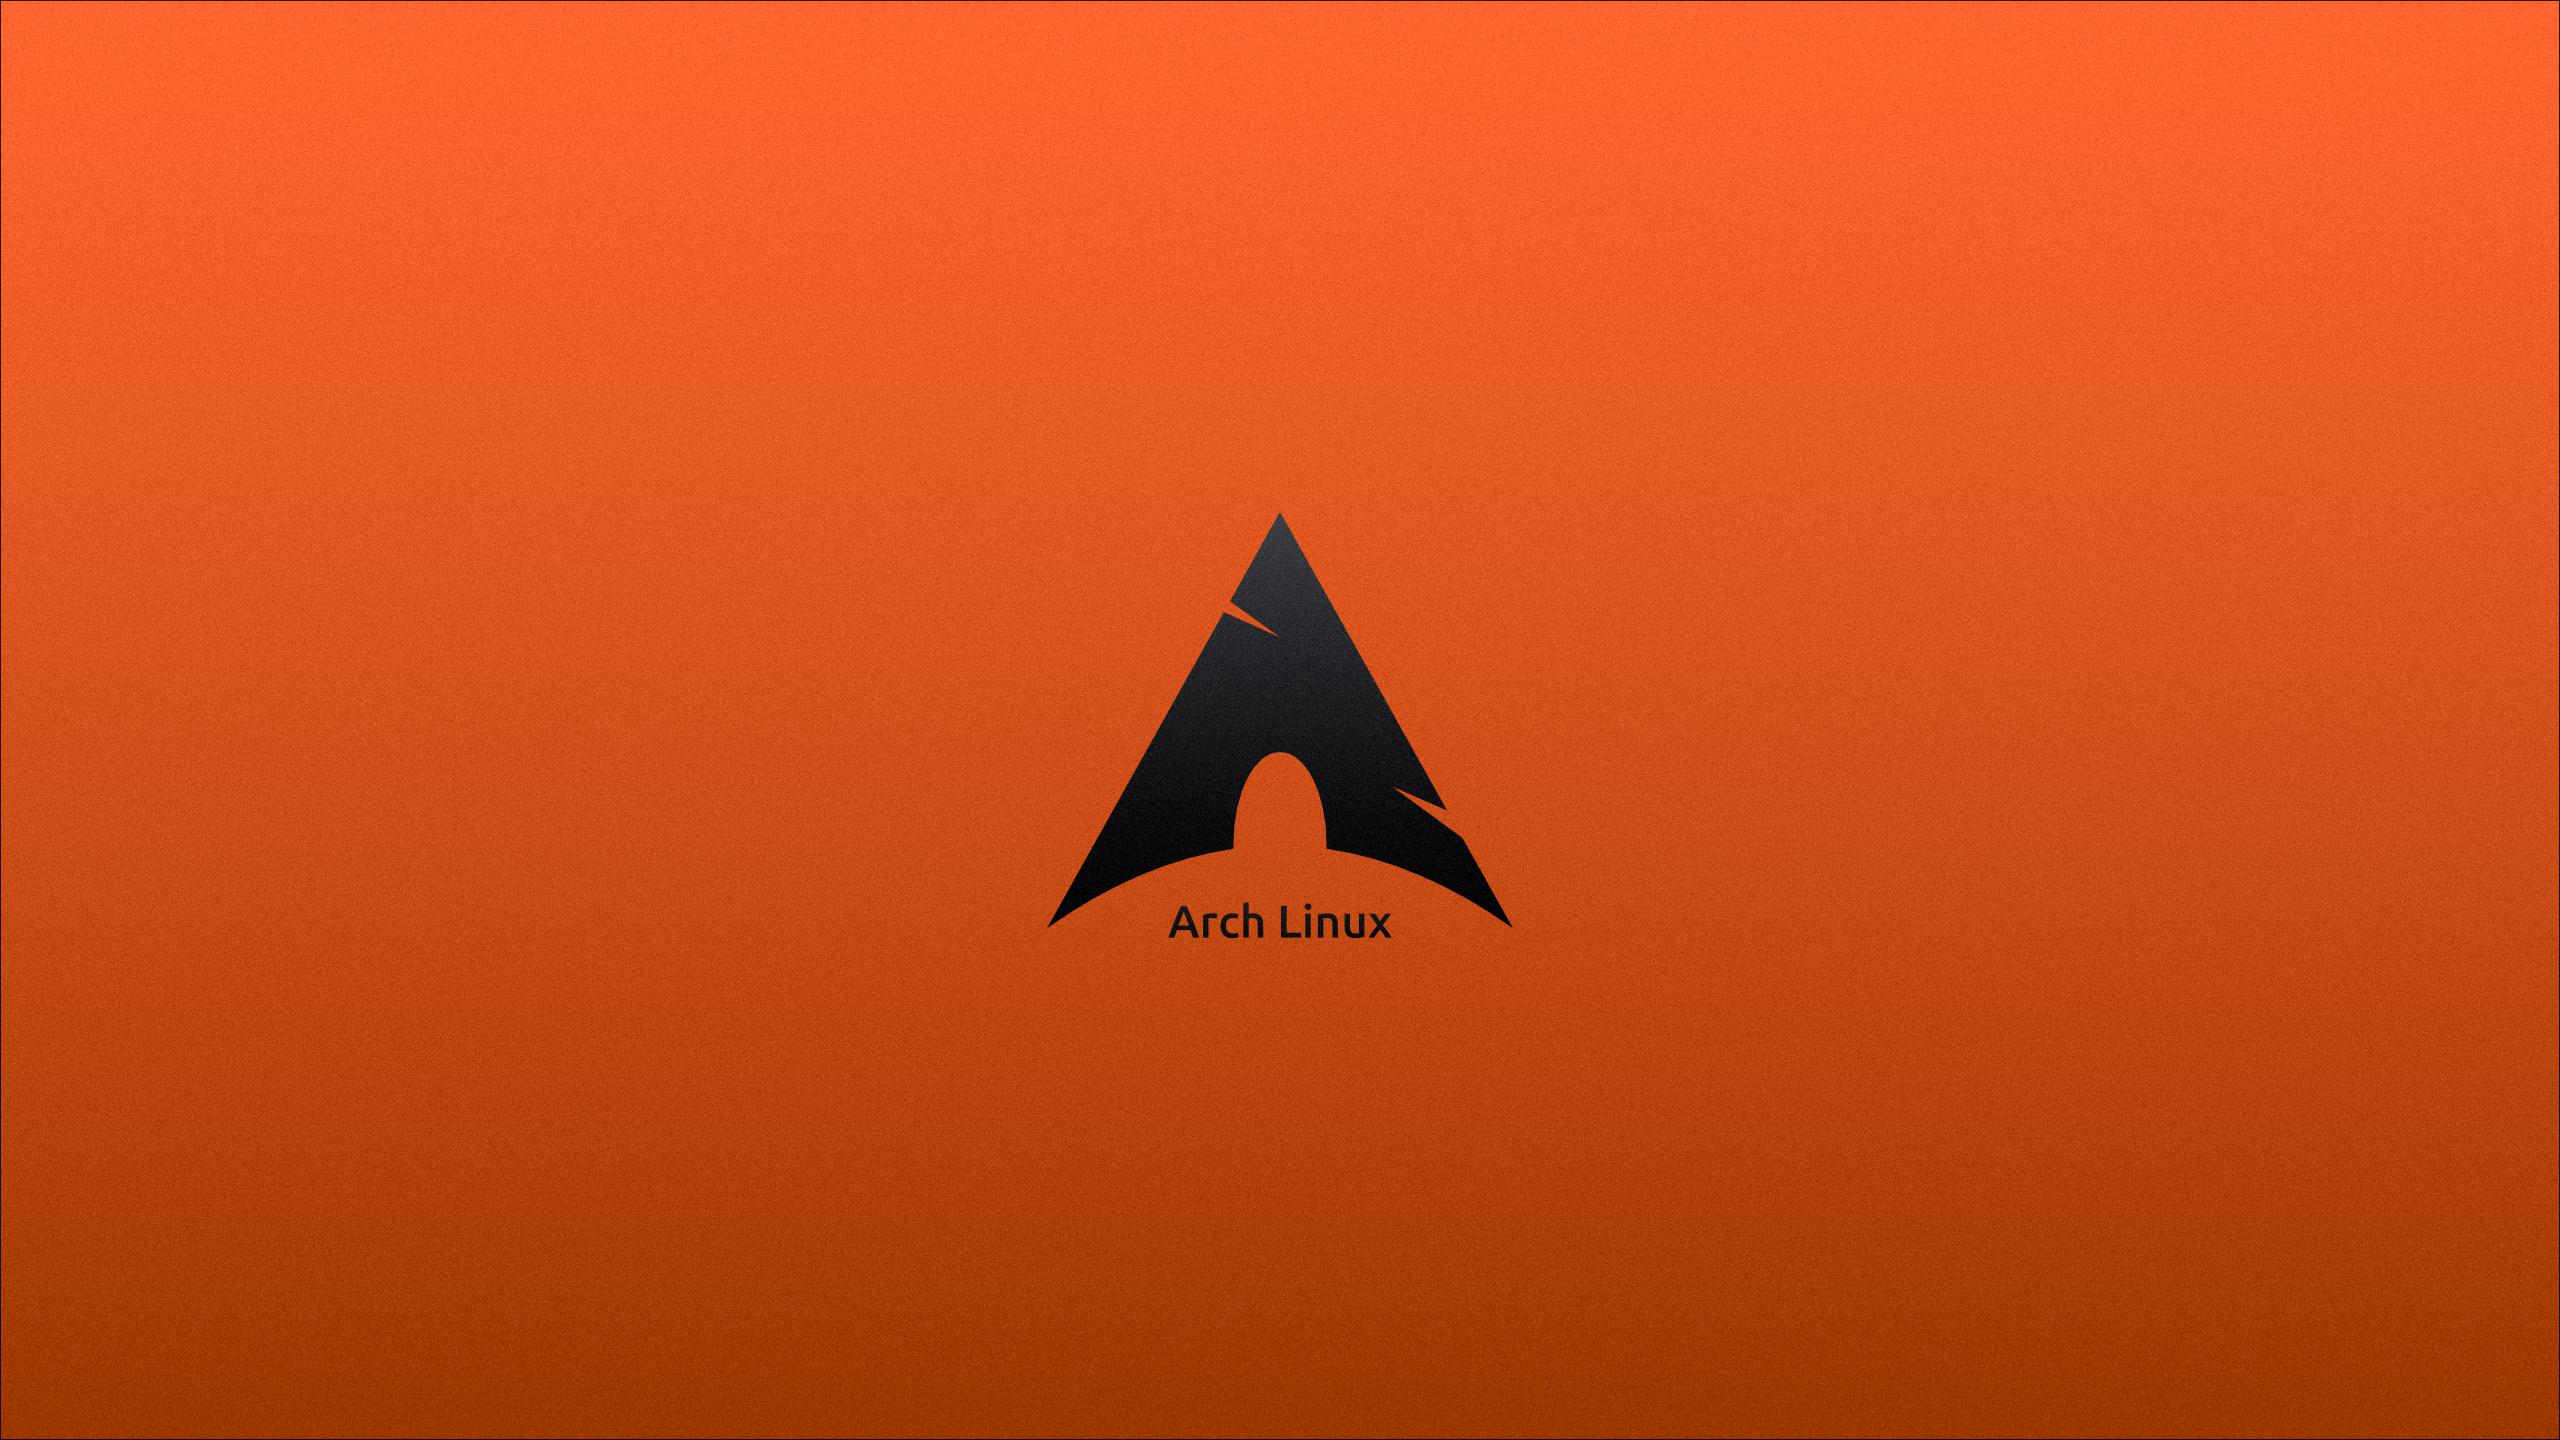 Linux 4K wallpaper for your desktop or mobile screen free and easy to download